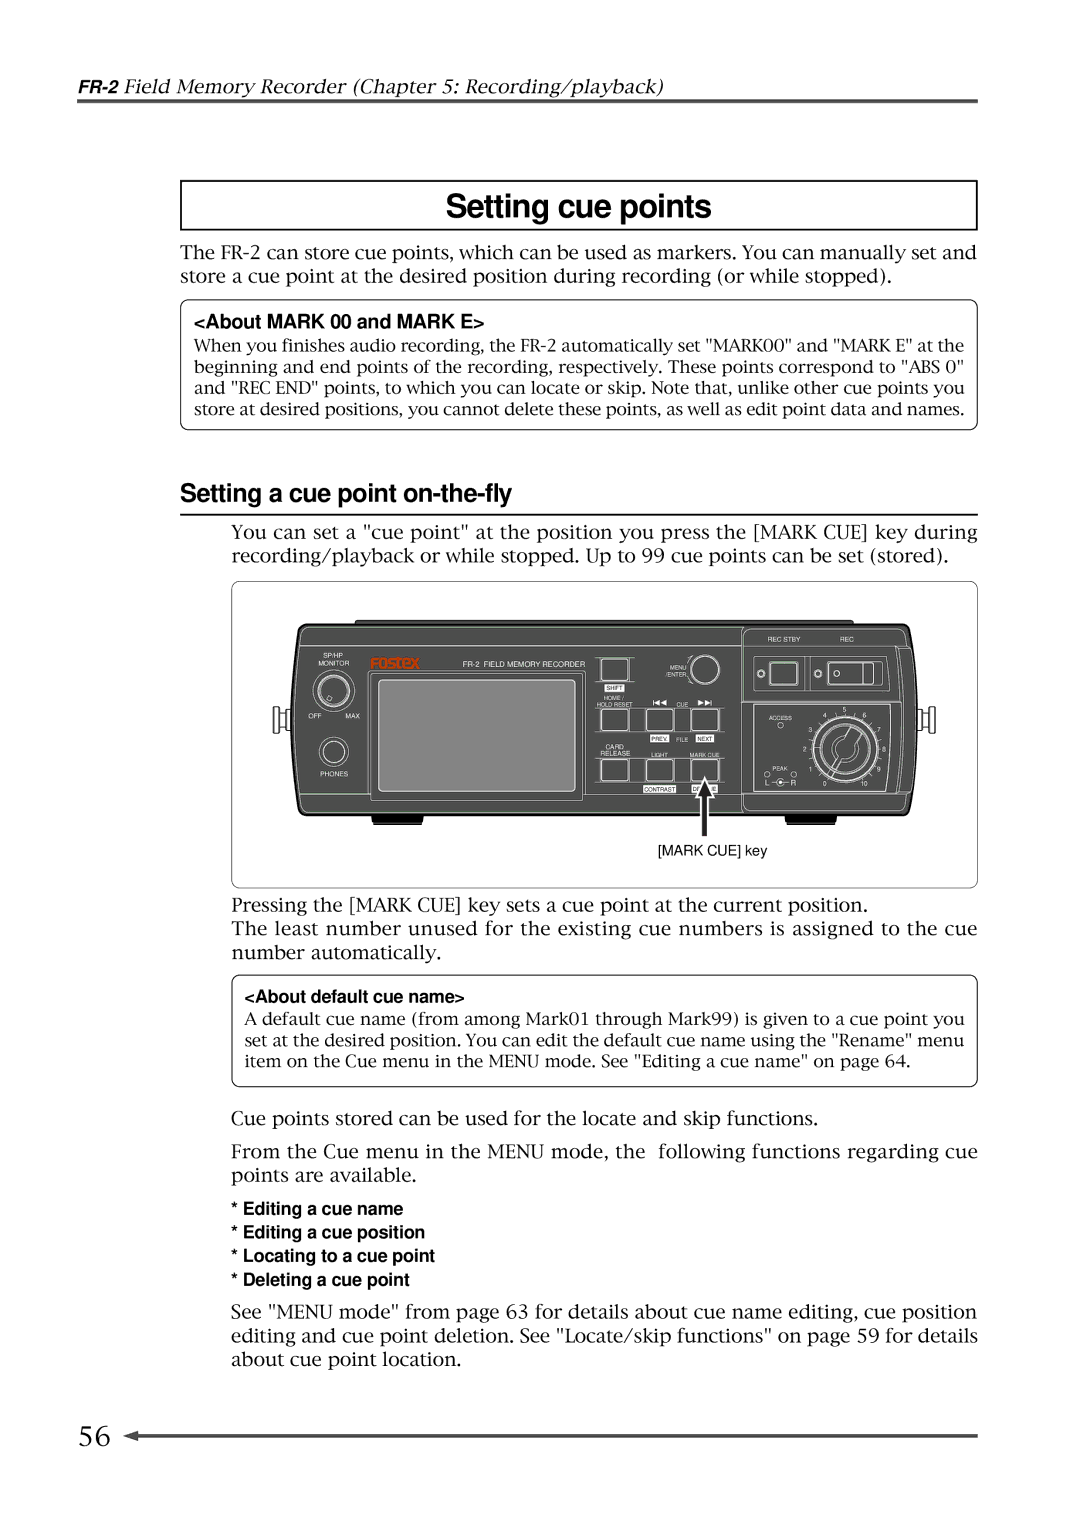 Fostex FR-2 owner manual Setting cue points, Setting a cue point on-the-fly, About default cue name 